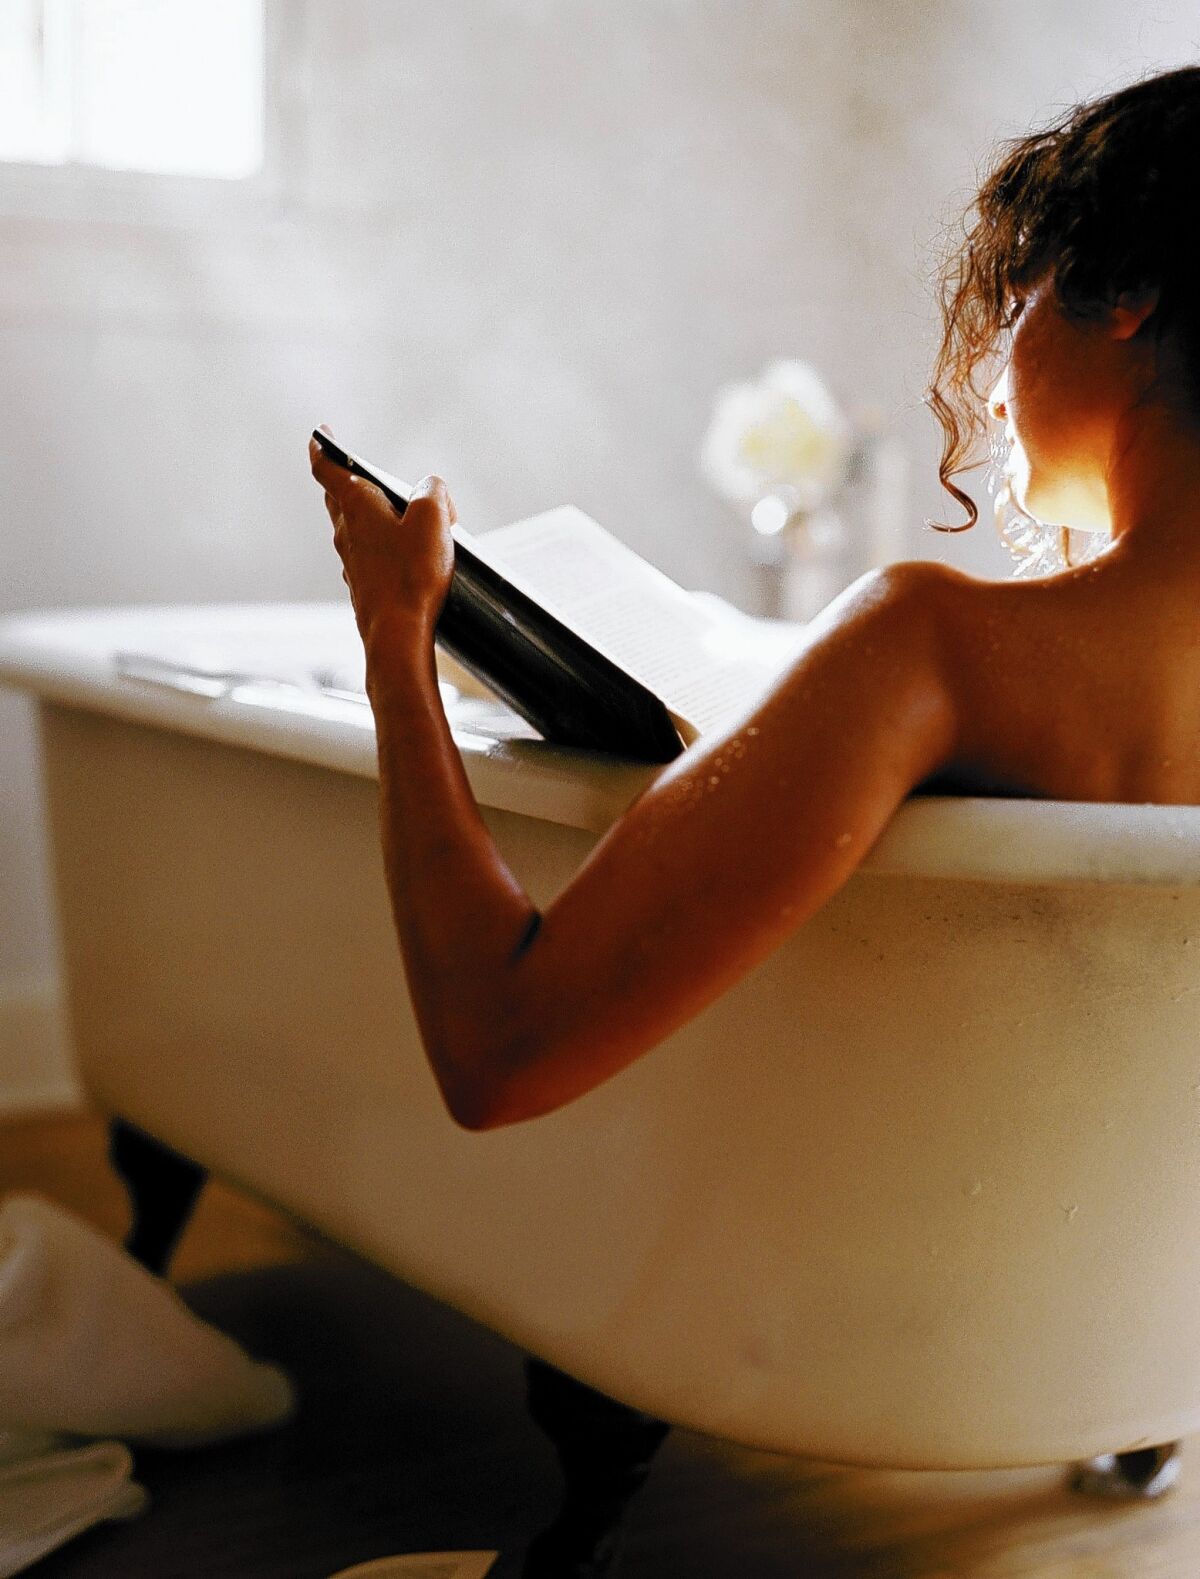 Relaxing in a bath can be even more beneficial with essential oils or other add-ins to help soothe skin.